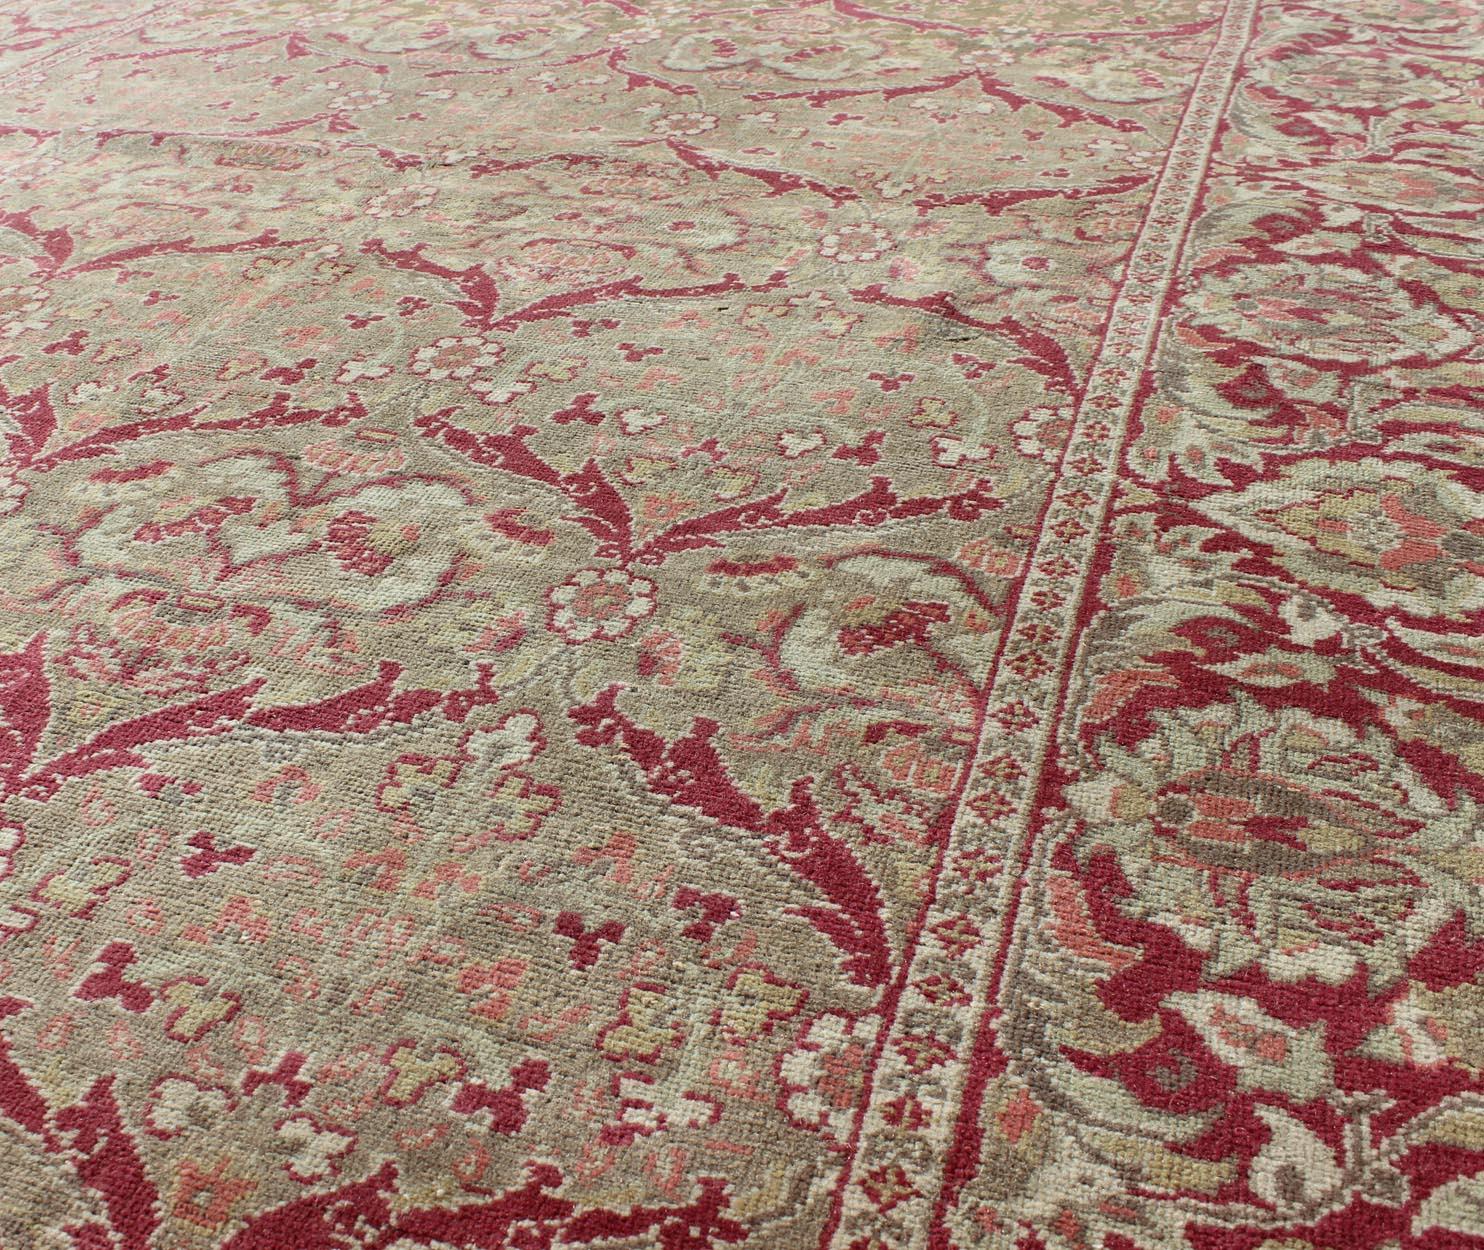 Vintage Turkish Sivas Rug in Burgundy Red, Cream, & Taupe with All-Over Design In Good Condition For Sale In Atlanta, GA